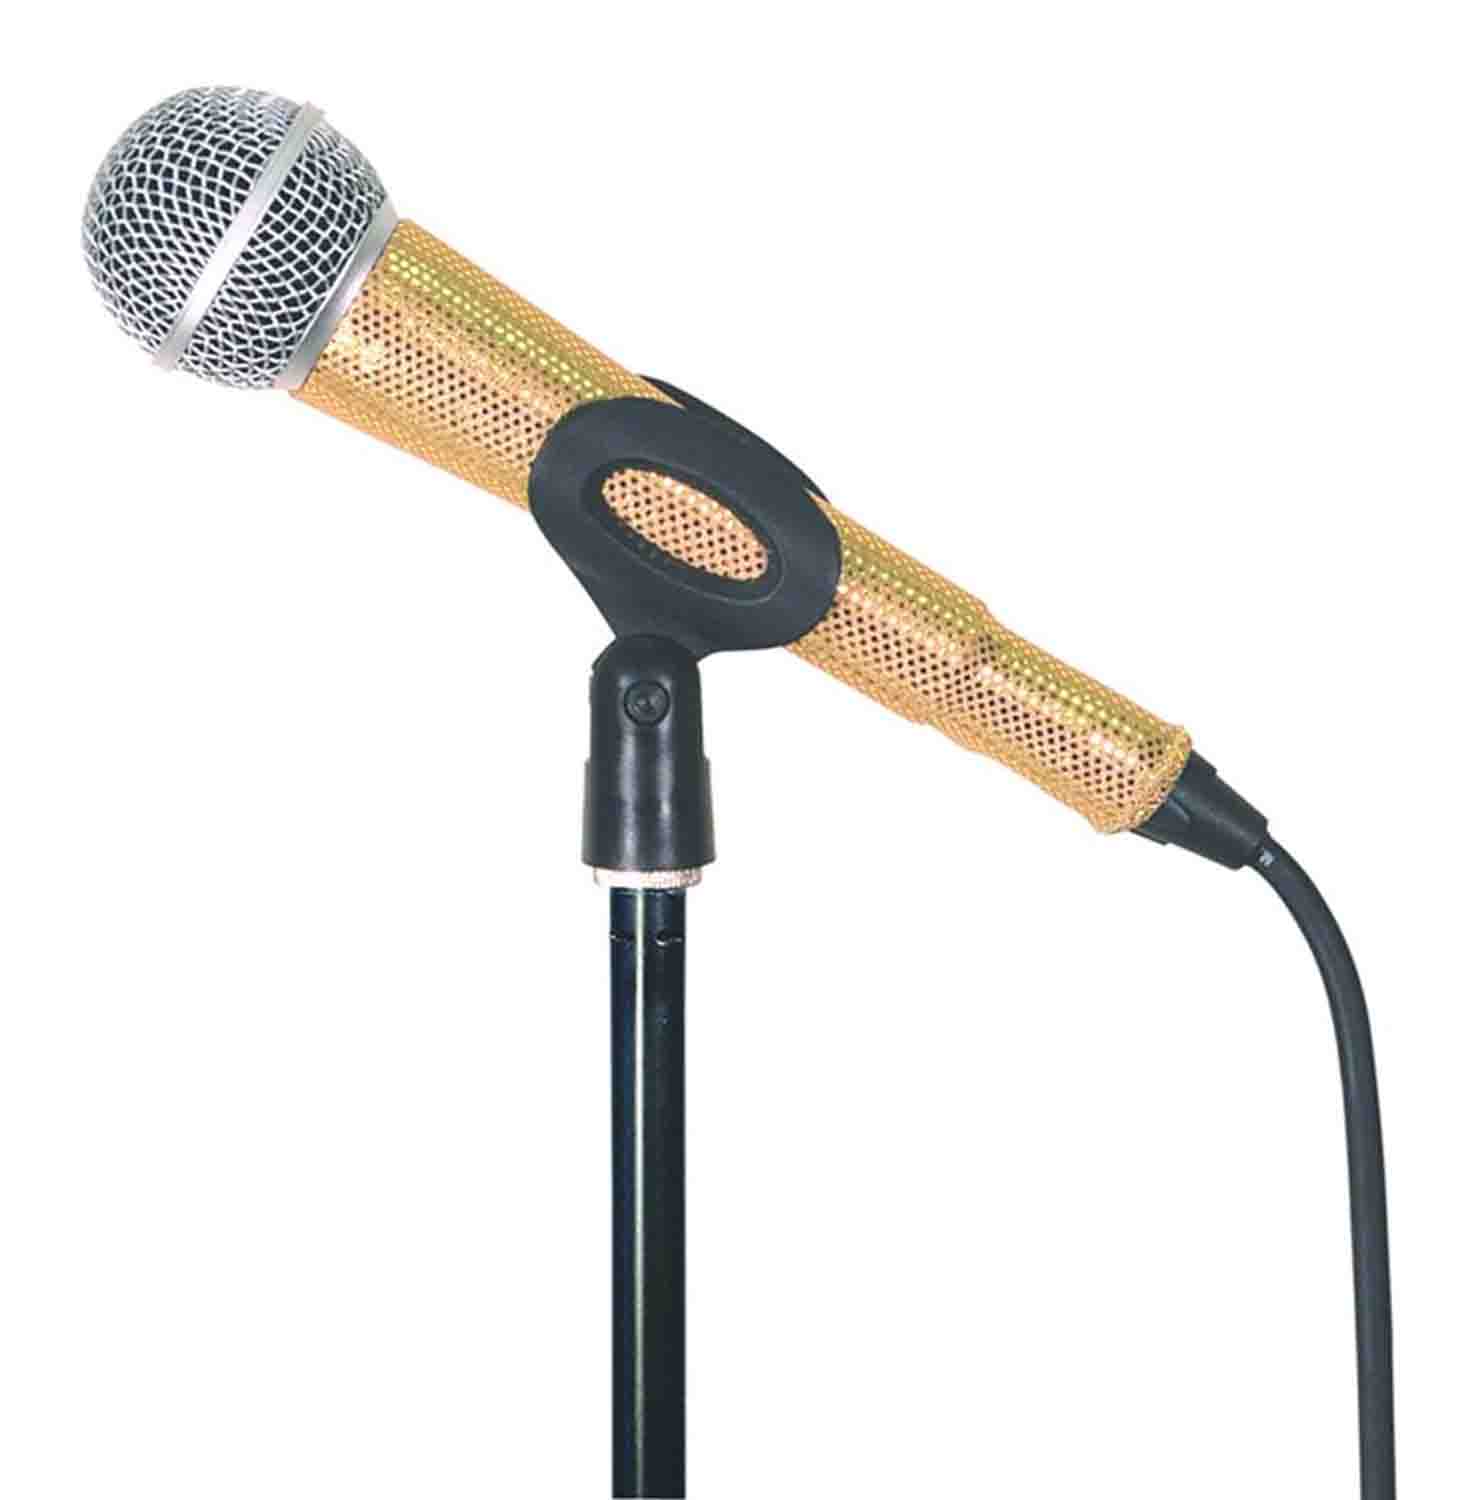 MicFX SF076 Laser Cut Corded Microphone Sleeve - Gold - Hollywood DJ